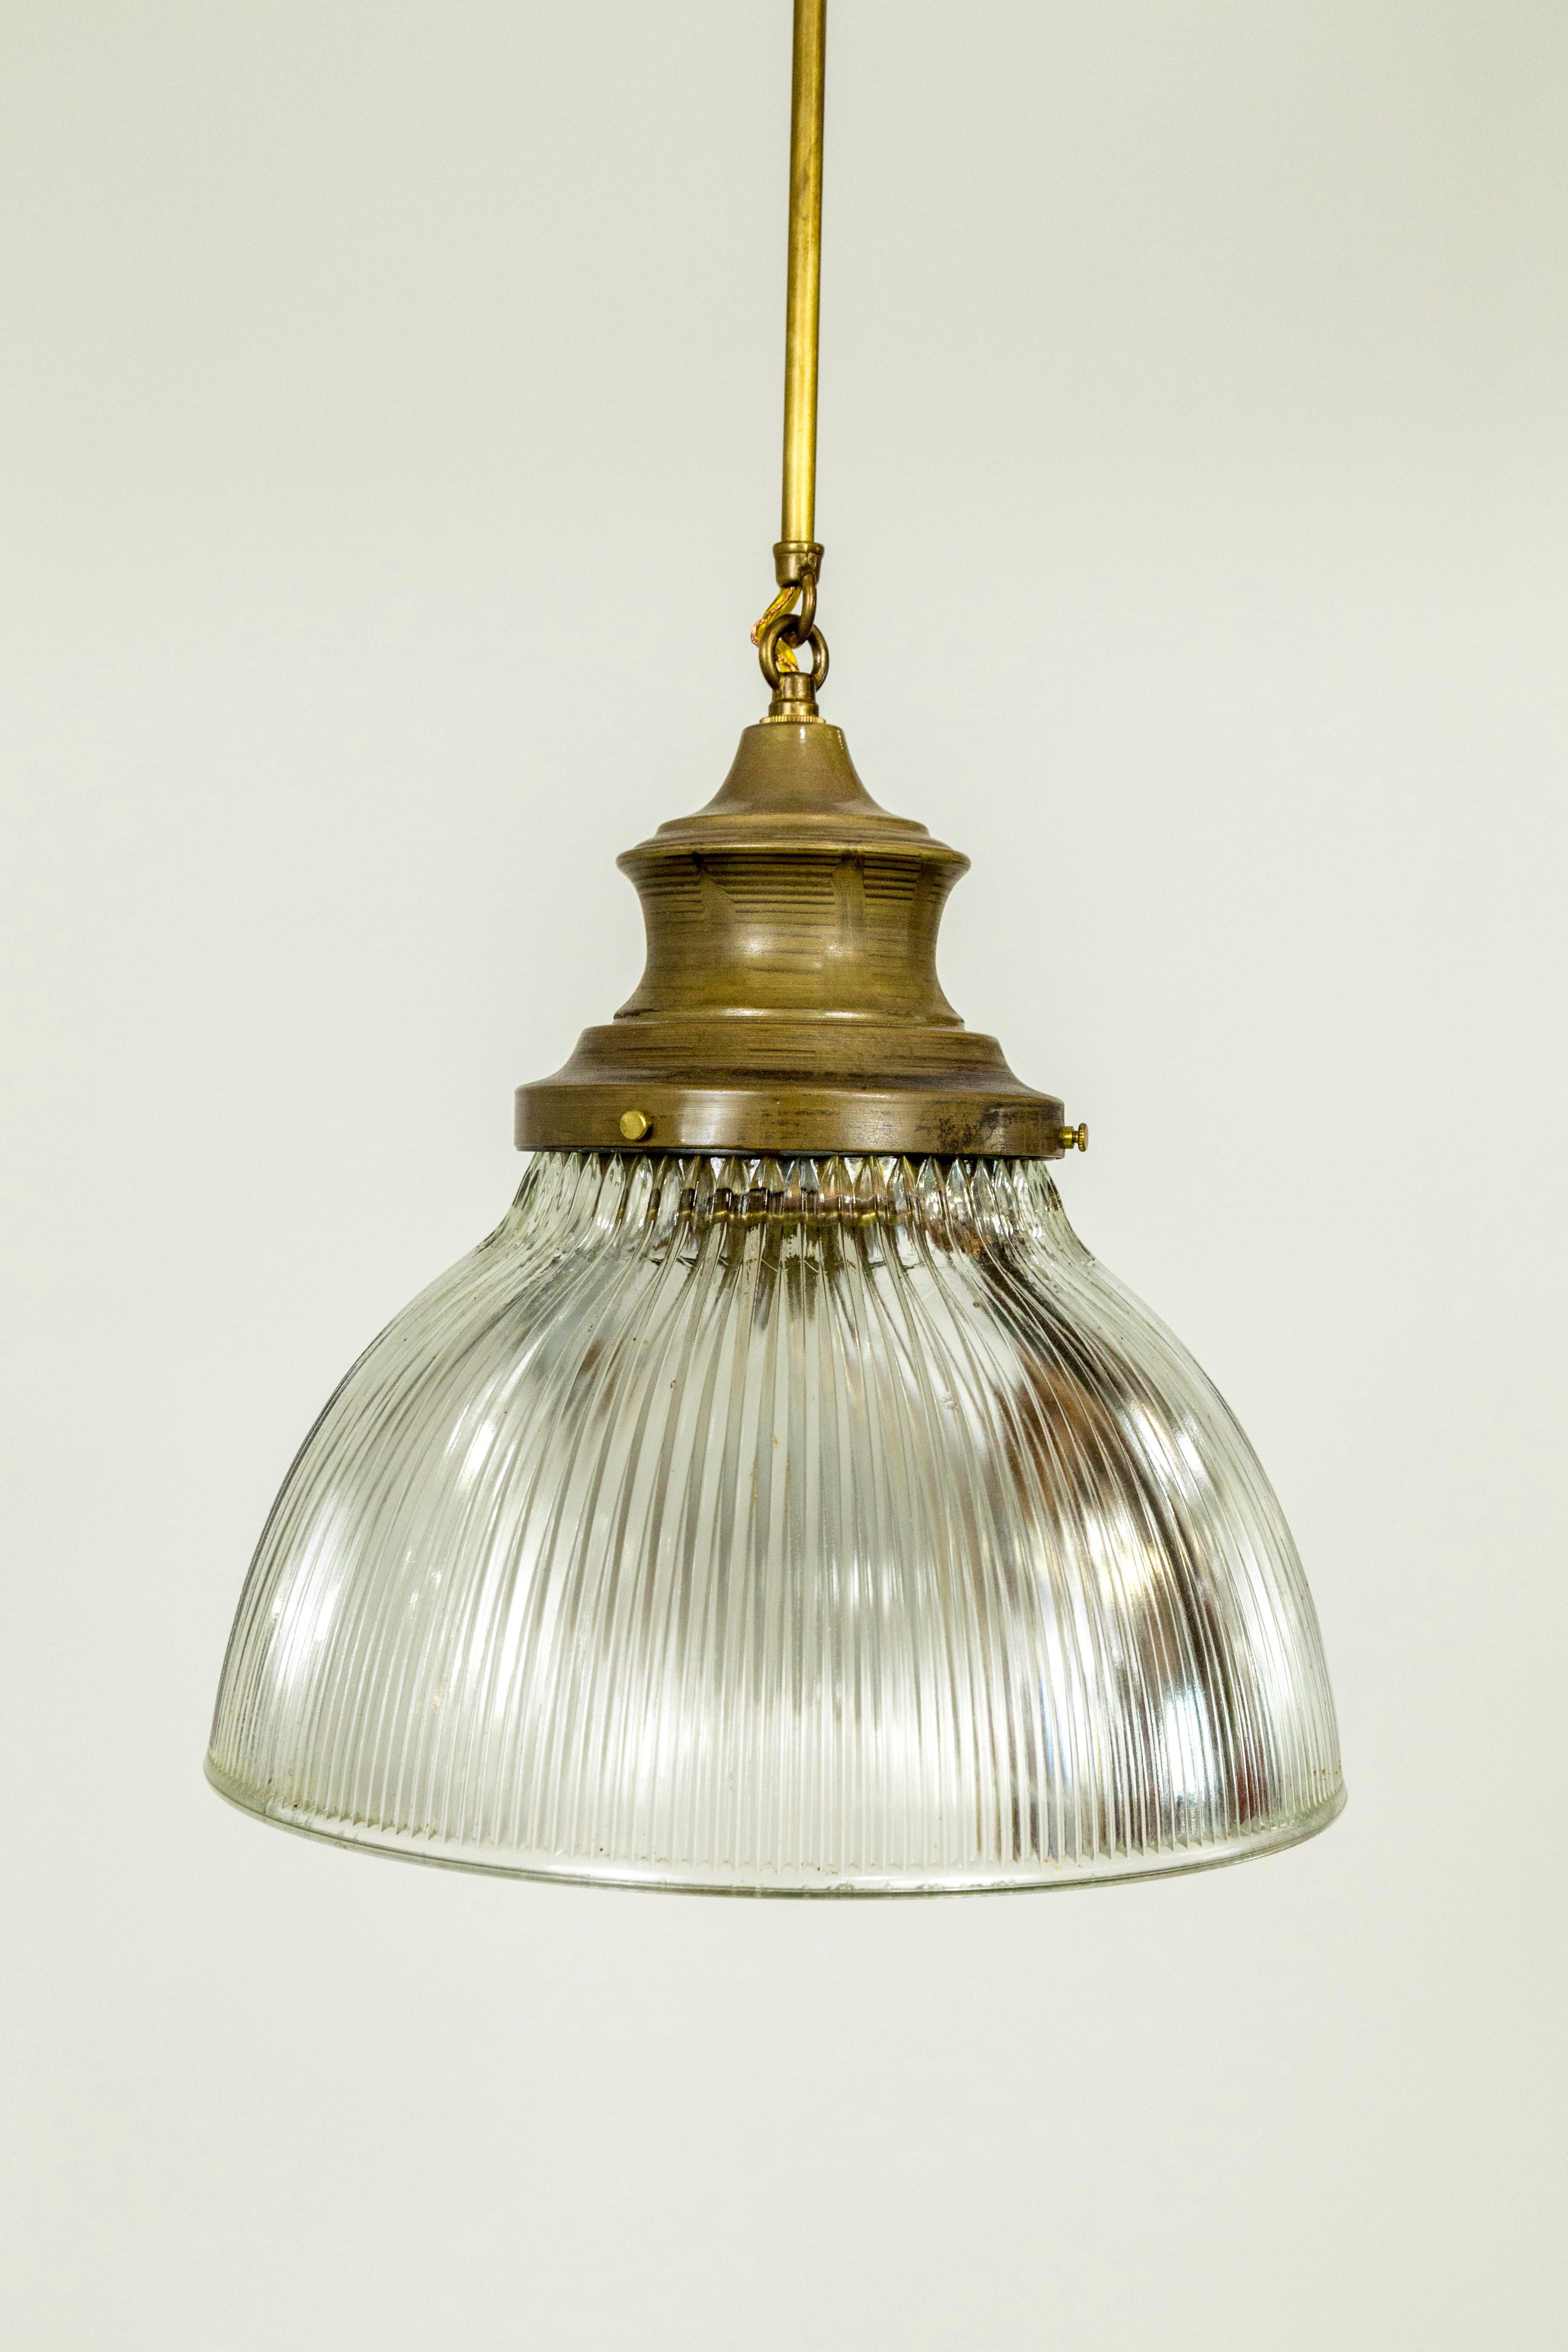 Large, thick, holophane glass pieces from the early 20th century, newly fashioned into pendant lights with brass glass holders, stem, and canopy. 12.25